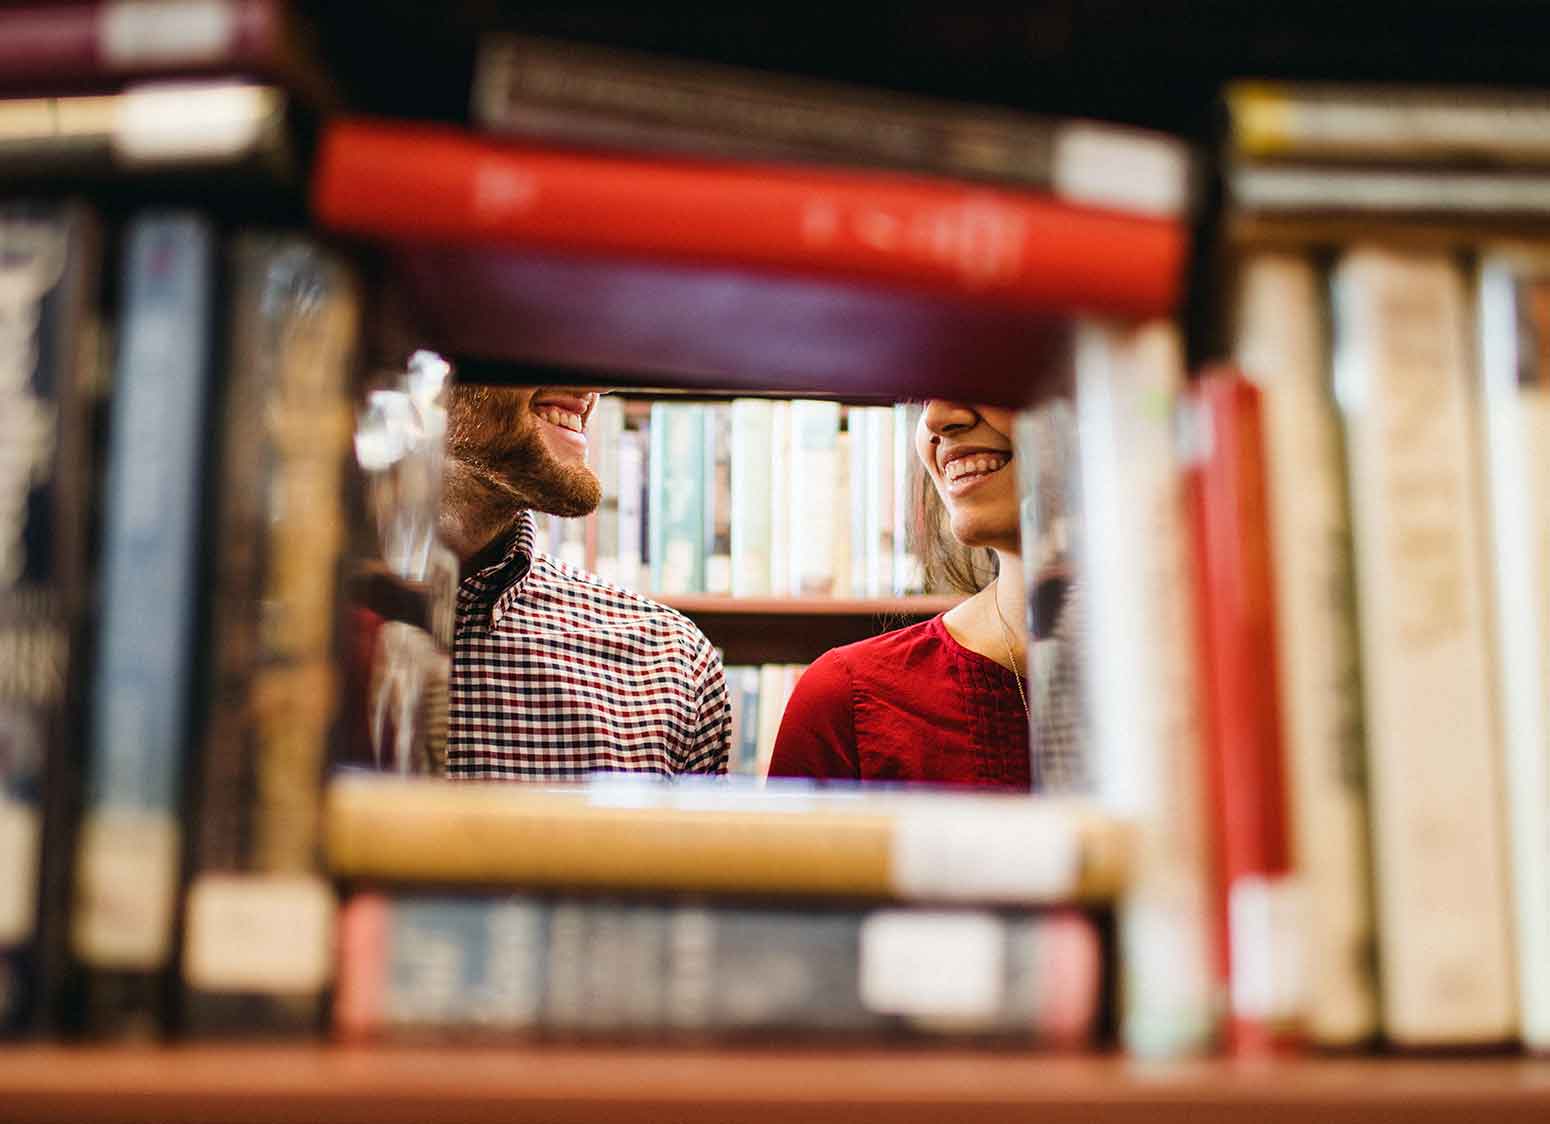 library visitors framed by books on shelf